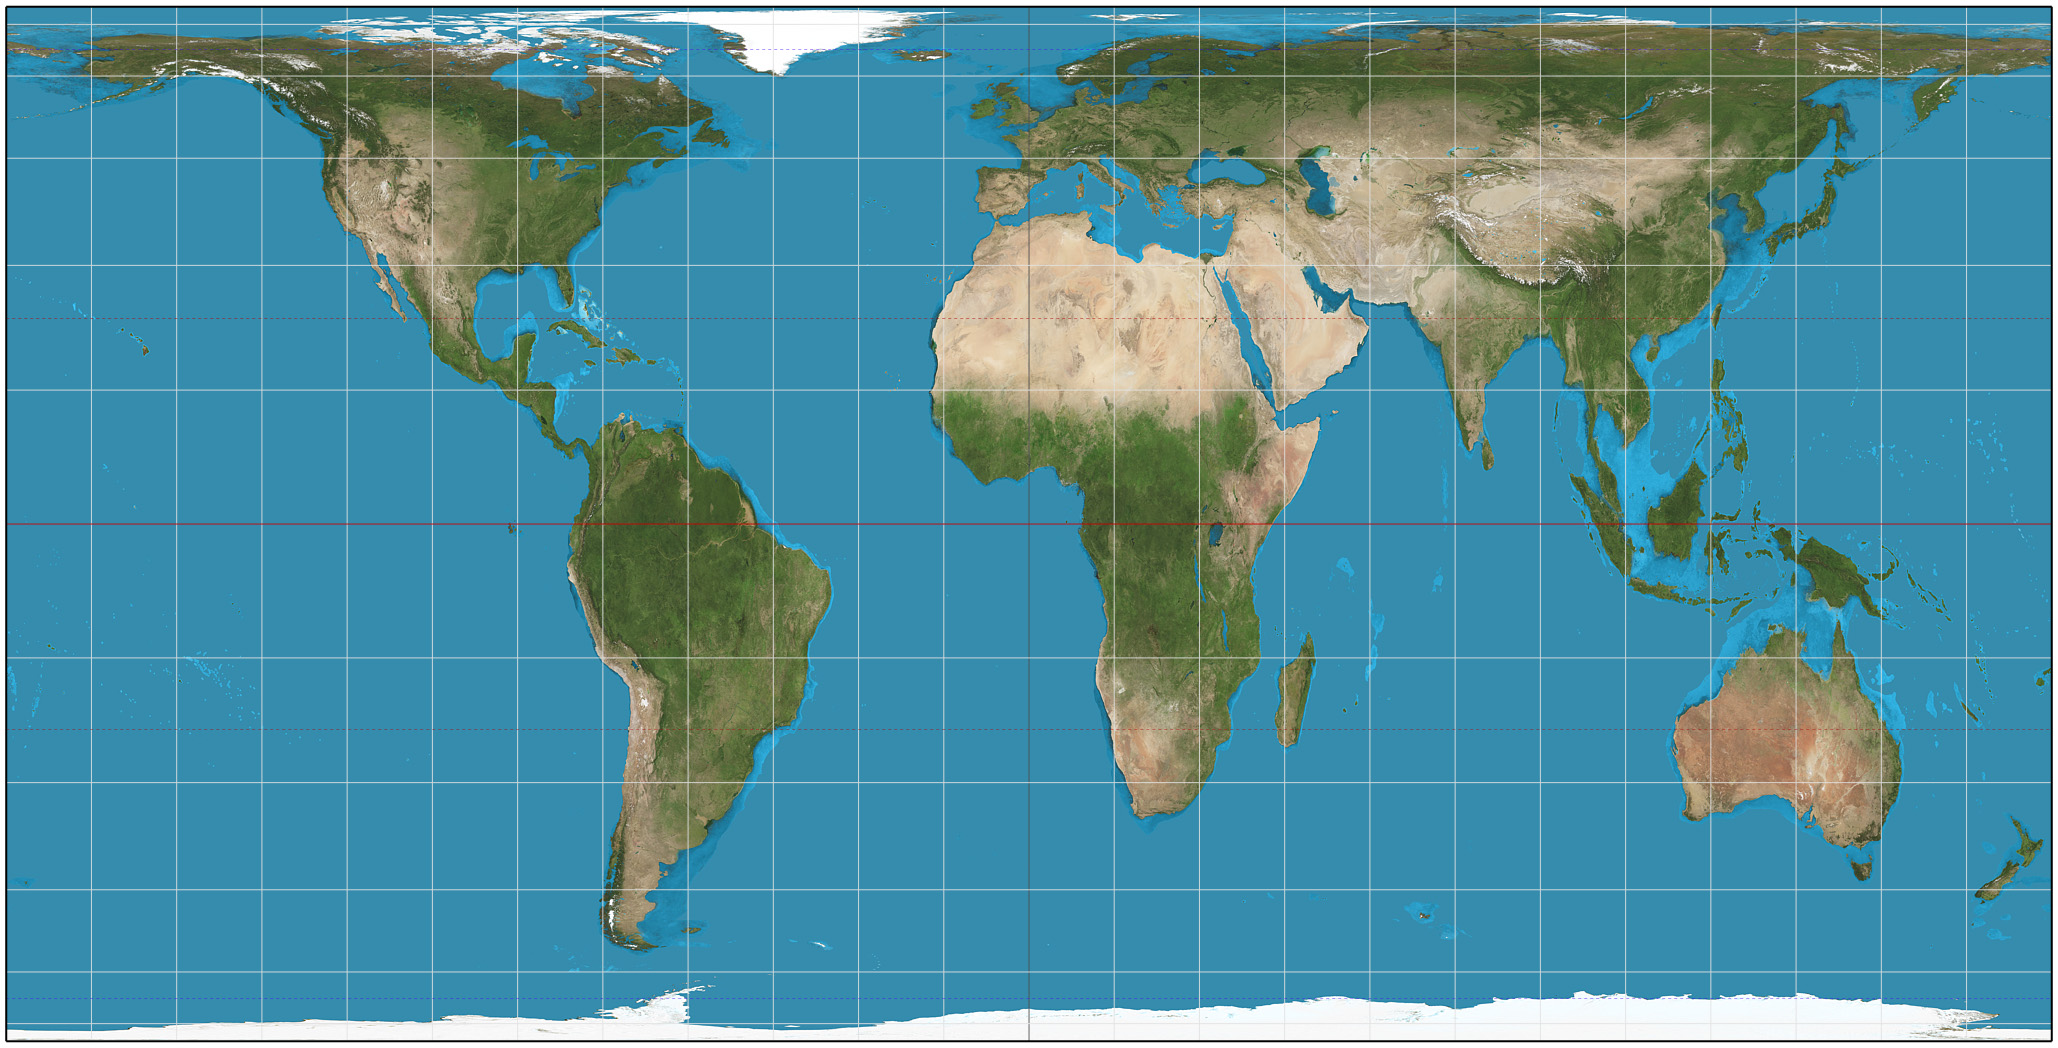 Image of Hobo Dyer map projection of the World